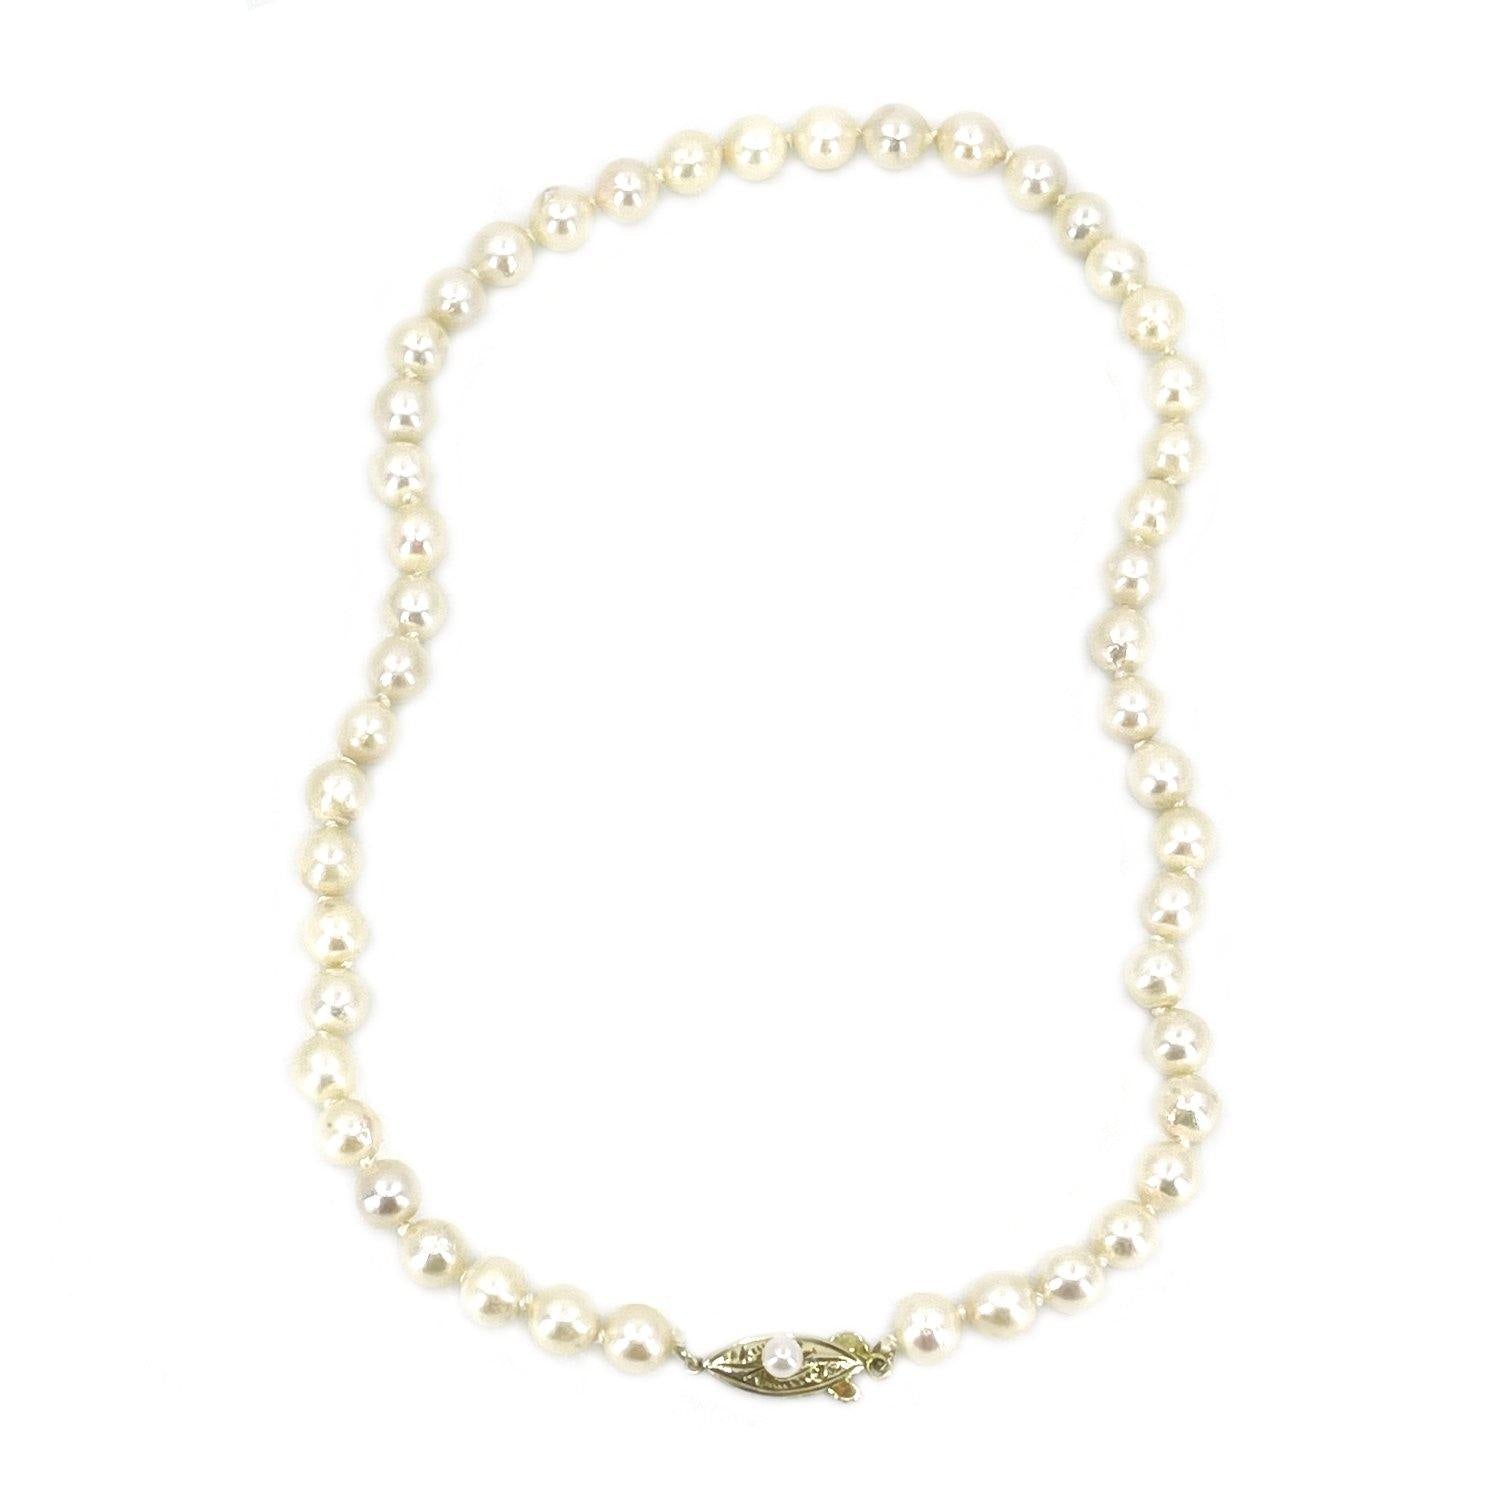 Deco Choker Japanese Saltwater Cultured Akoya Pearl Baroque Necklace - Sterling Silver 15 Inch